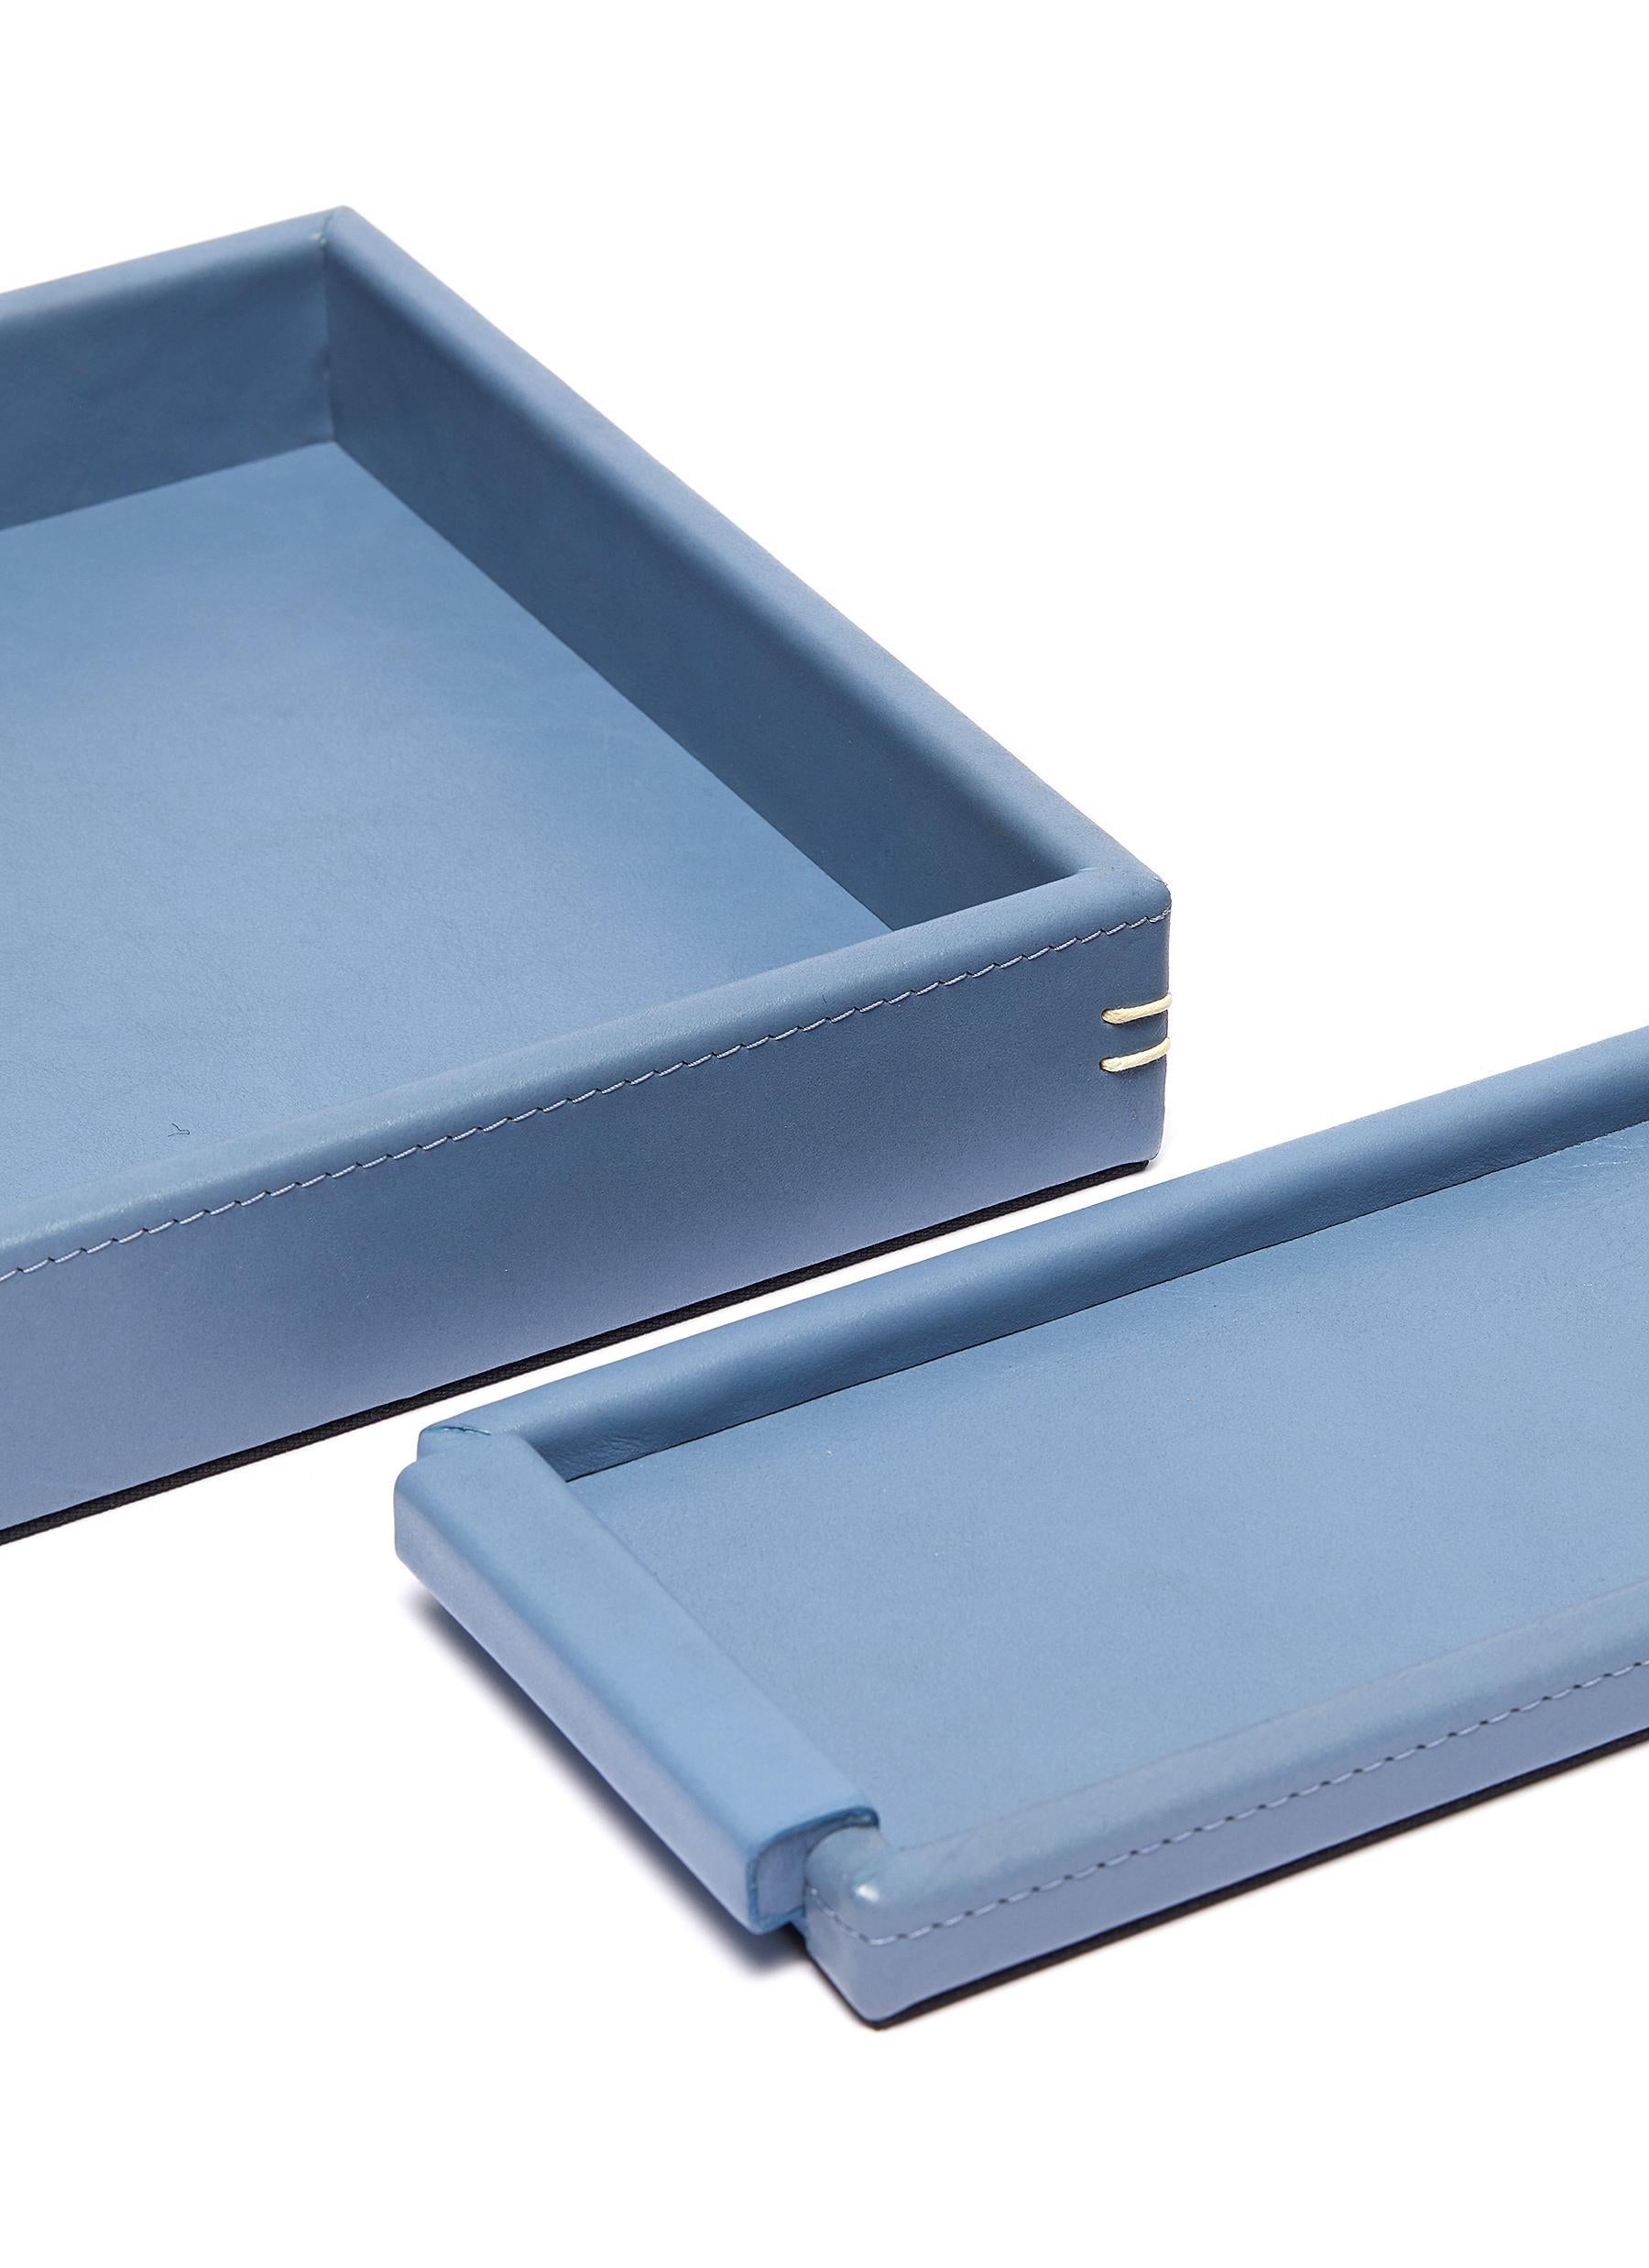 Knotted double leather serving tray set.
Hand stitched calf leather.
Also, available in a larger size tray set of two, size 55 x 35 x 5.8 H cm.
Larger quantities available upon request, with 8 weeks production time.

Description: Knotted double